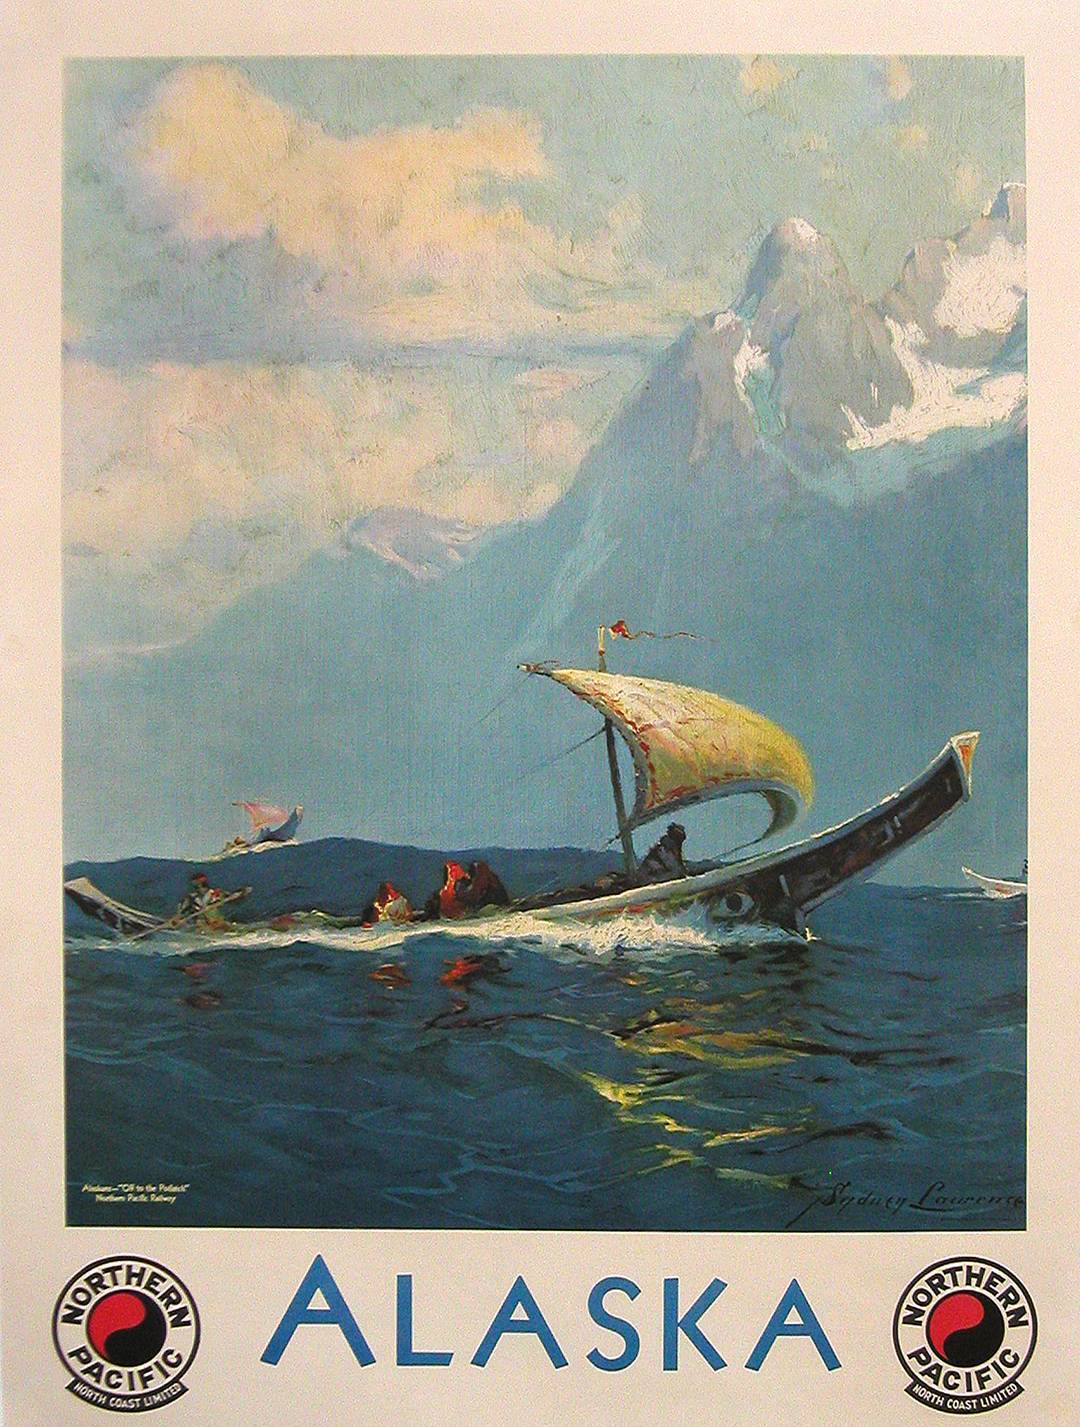 Original Northern Pacific Alaska Poster c1935 by Sydney Laurence